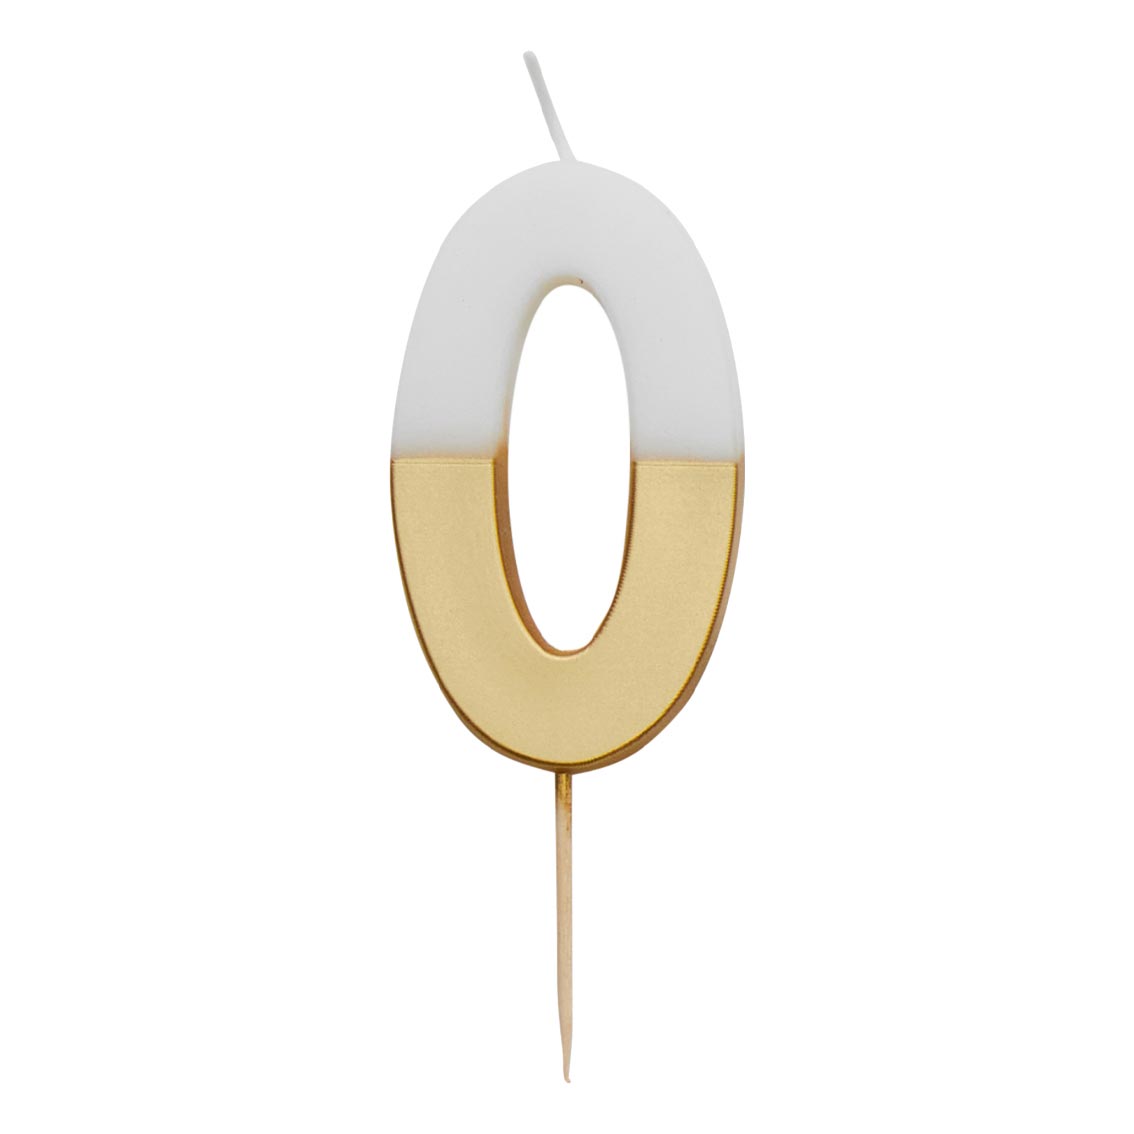 Gold & White Number Candle by talking tables at penny black - 0